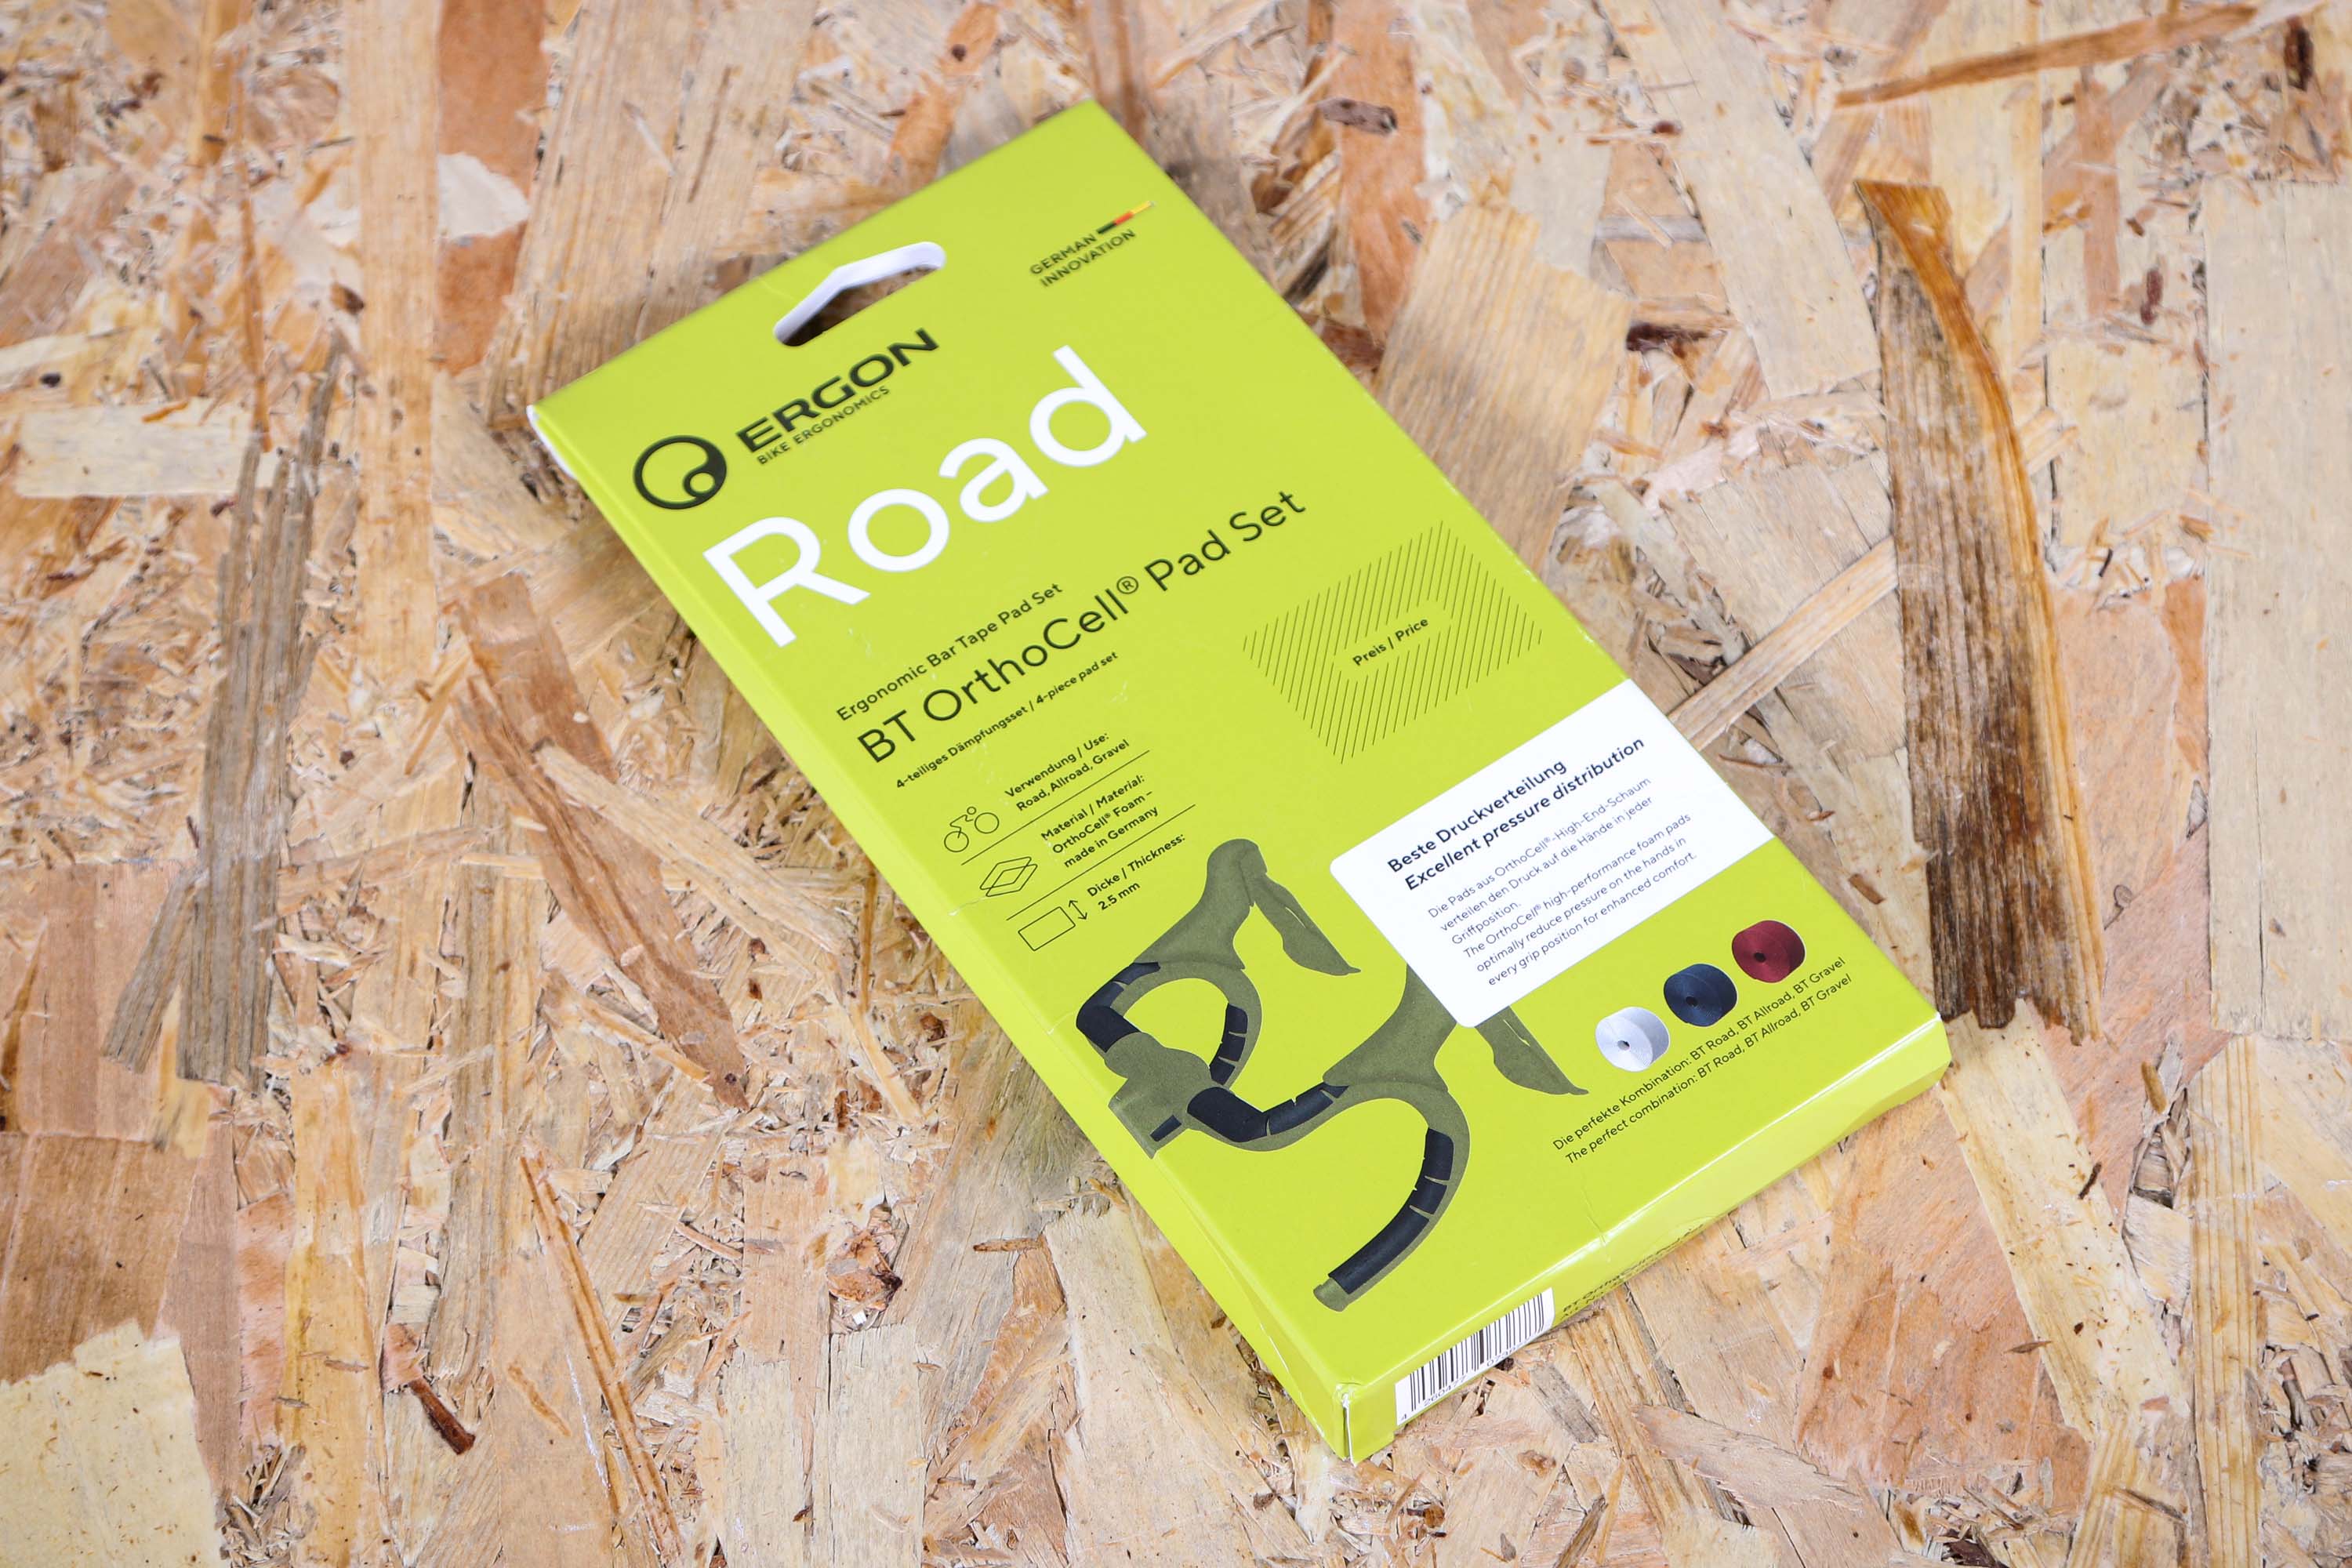 Review: Ergon BT Orthocell Pad Set